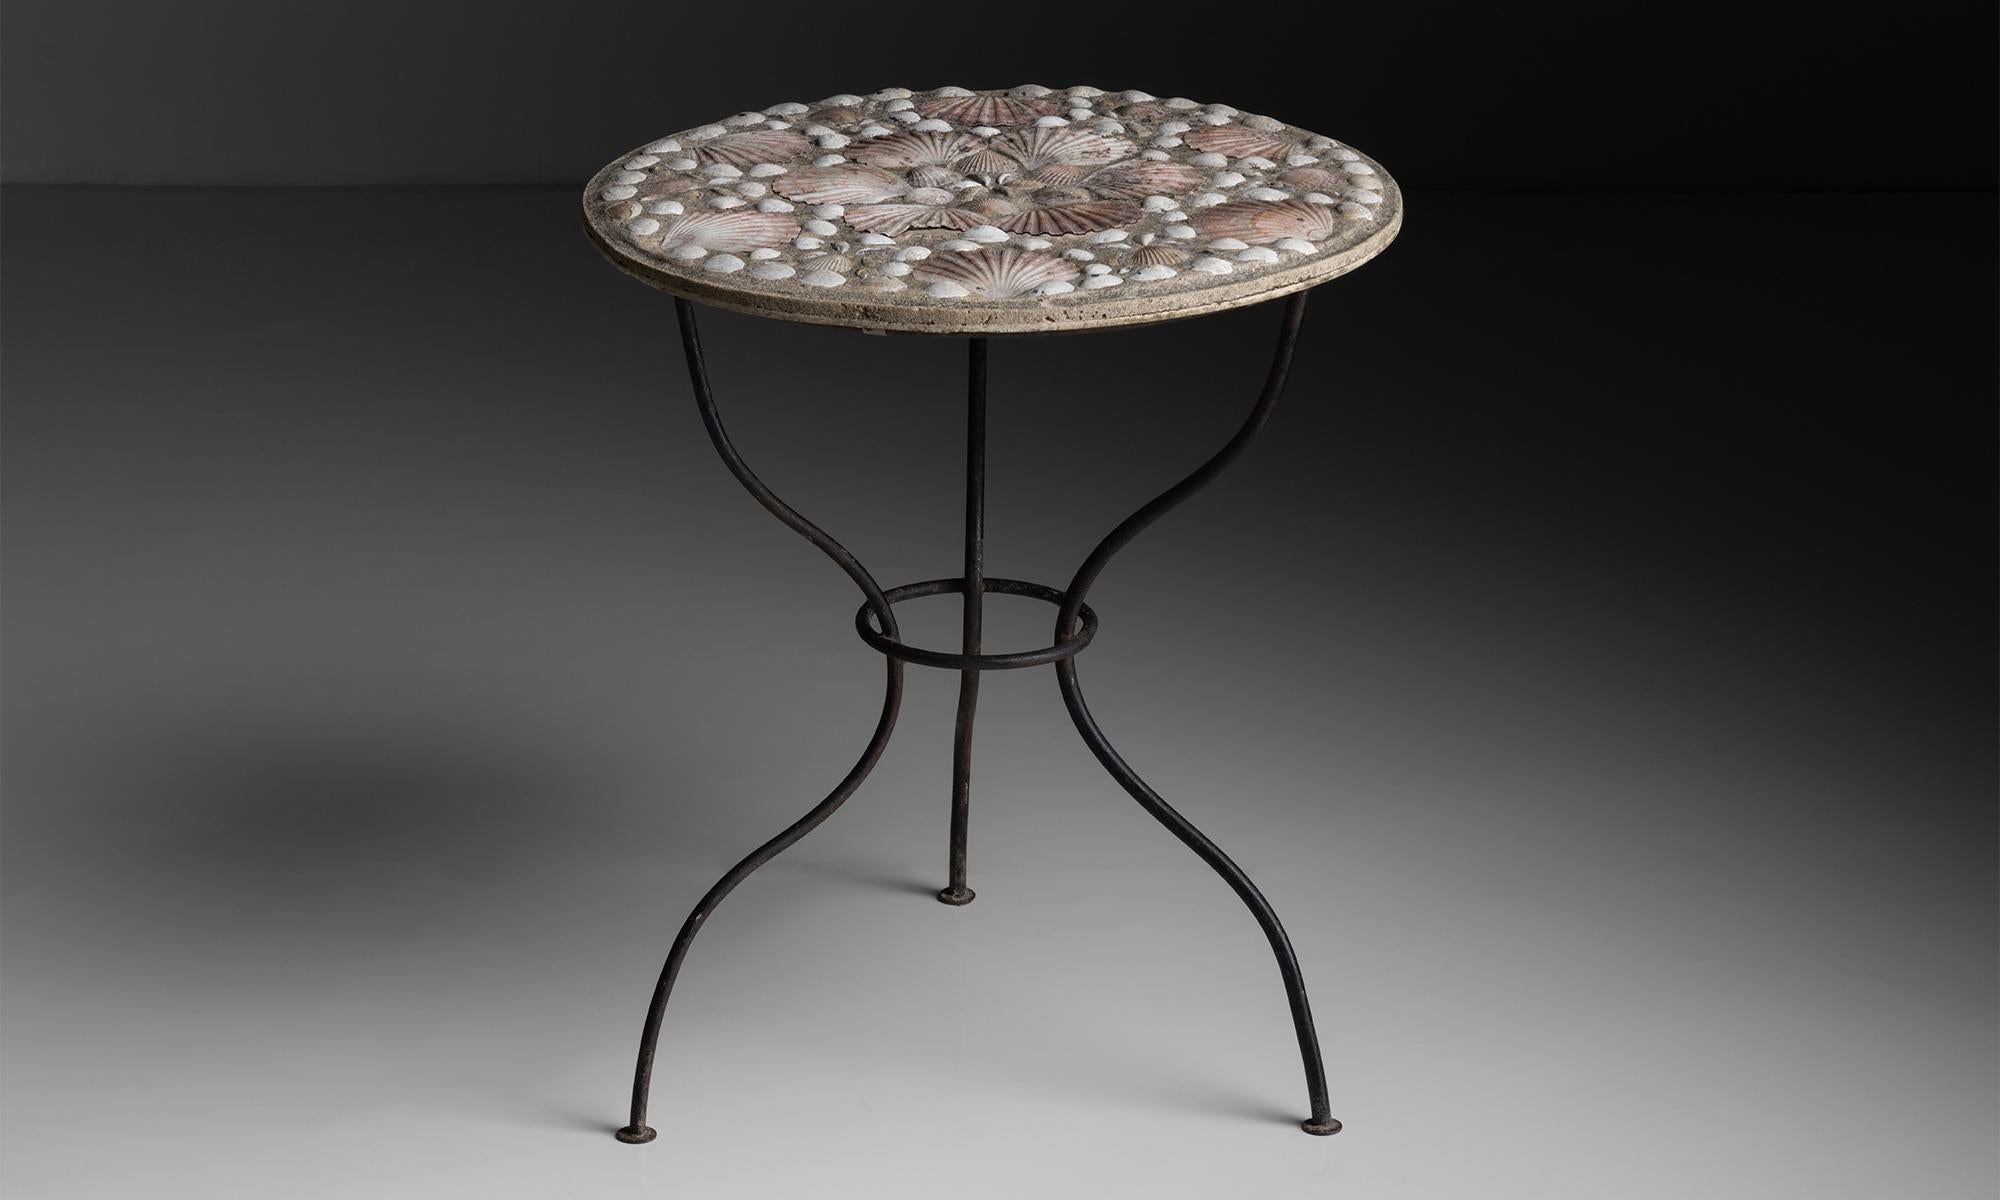 Shell Garden Table

England, circa 1950

Cement top with inset shells on iron base.

23.75”dia x 27.25”h